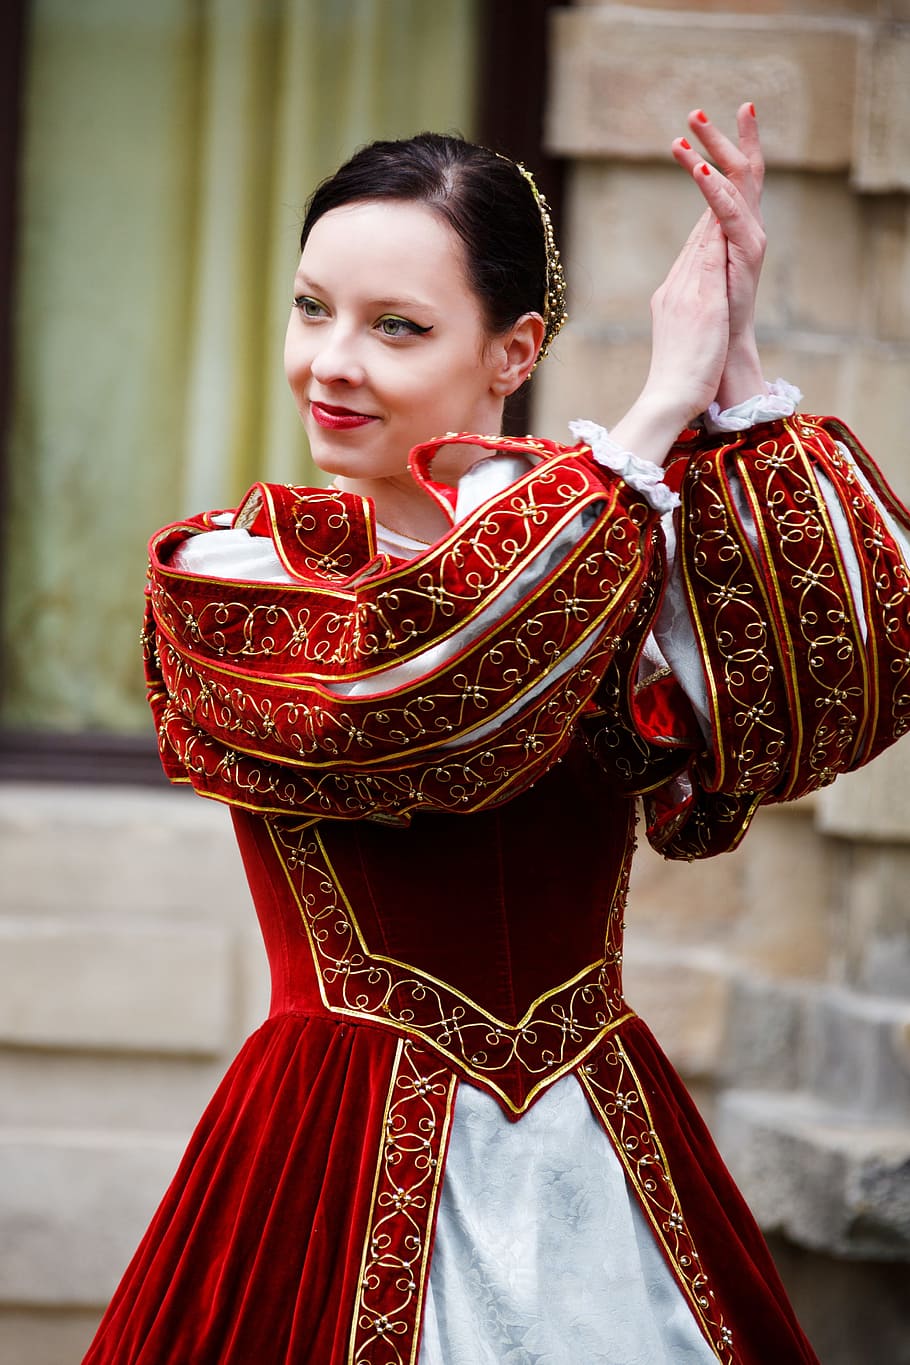 woman, wearing, red, white, traditional, dress, clapping, hands, medieval, dance